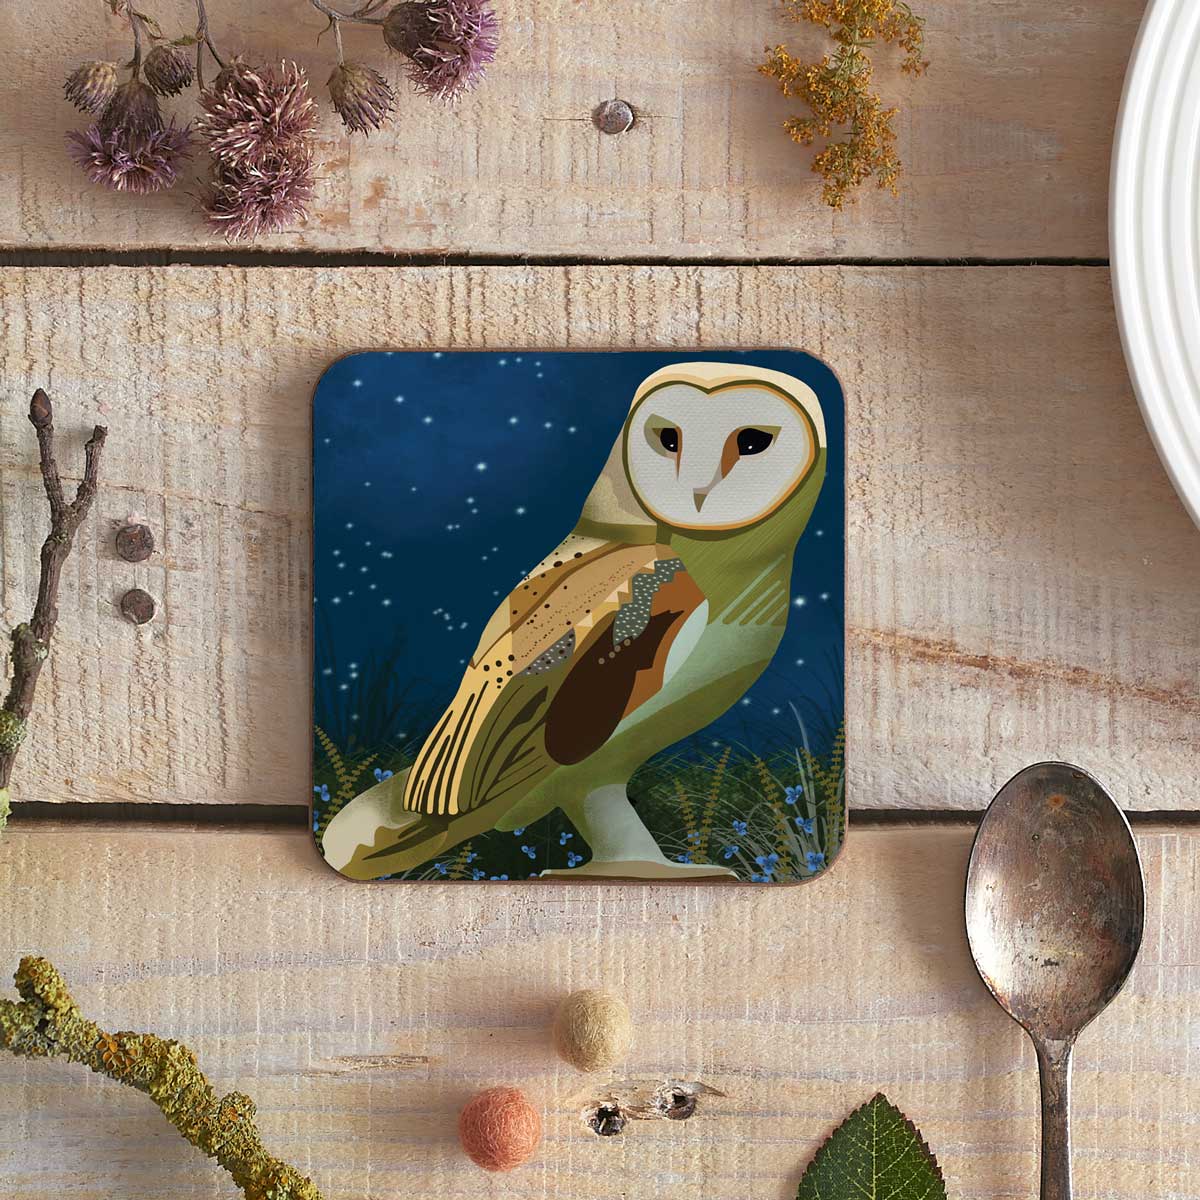 square coaster with owl illustration